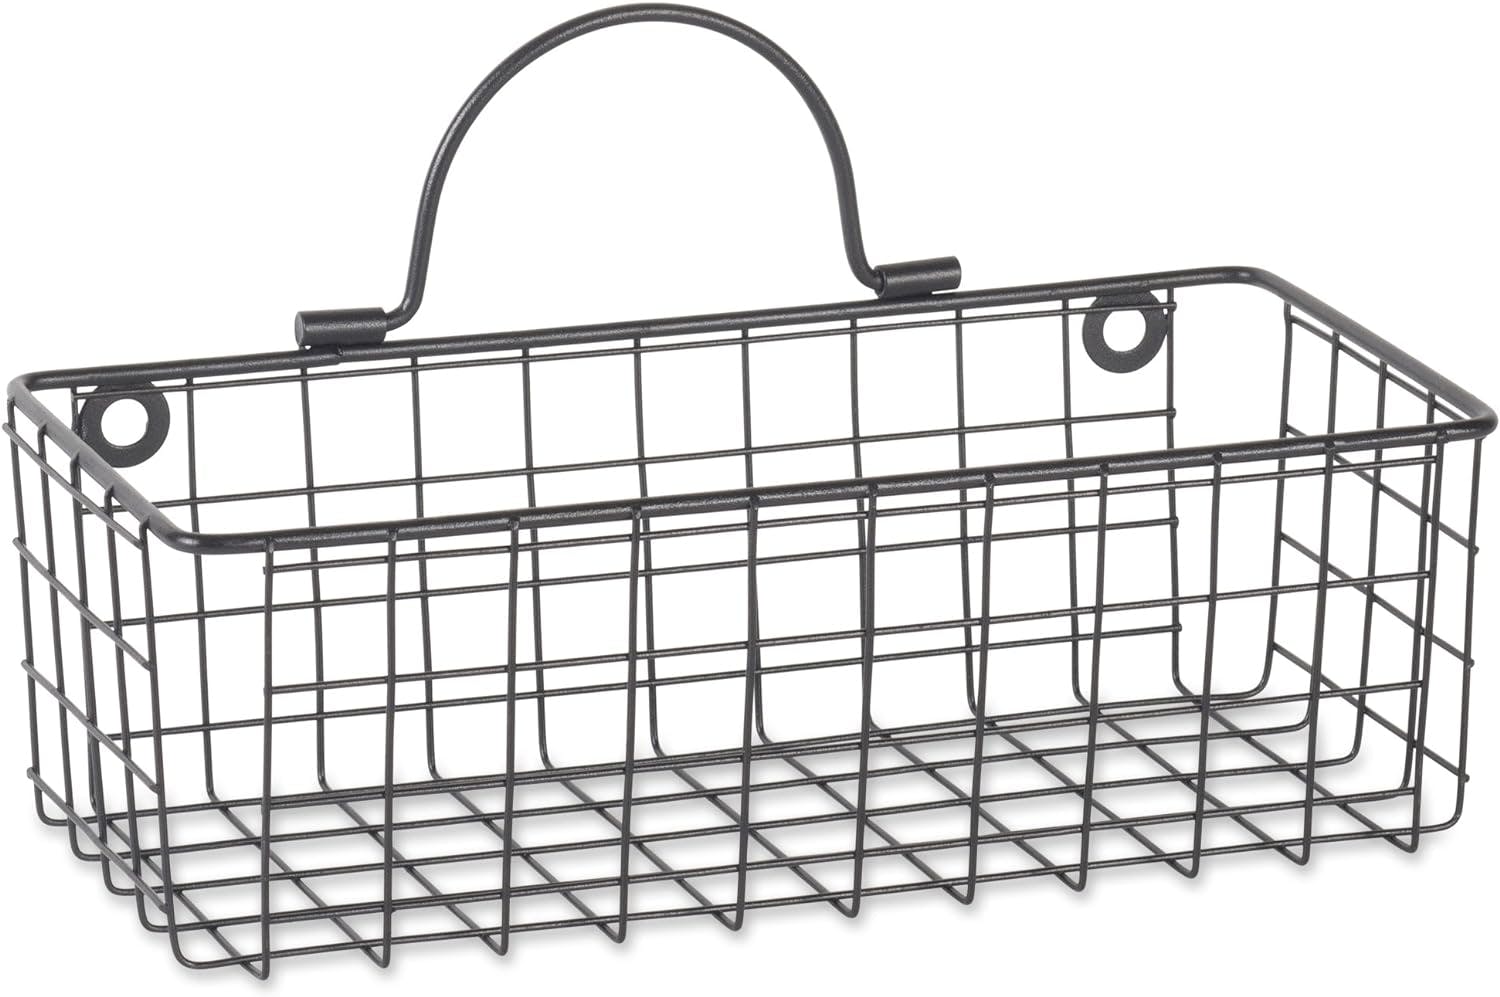 Vintage Black Small Rectangular Wire Wall Baskets, Set of 2